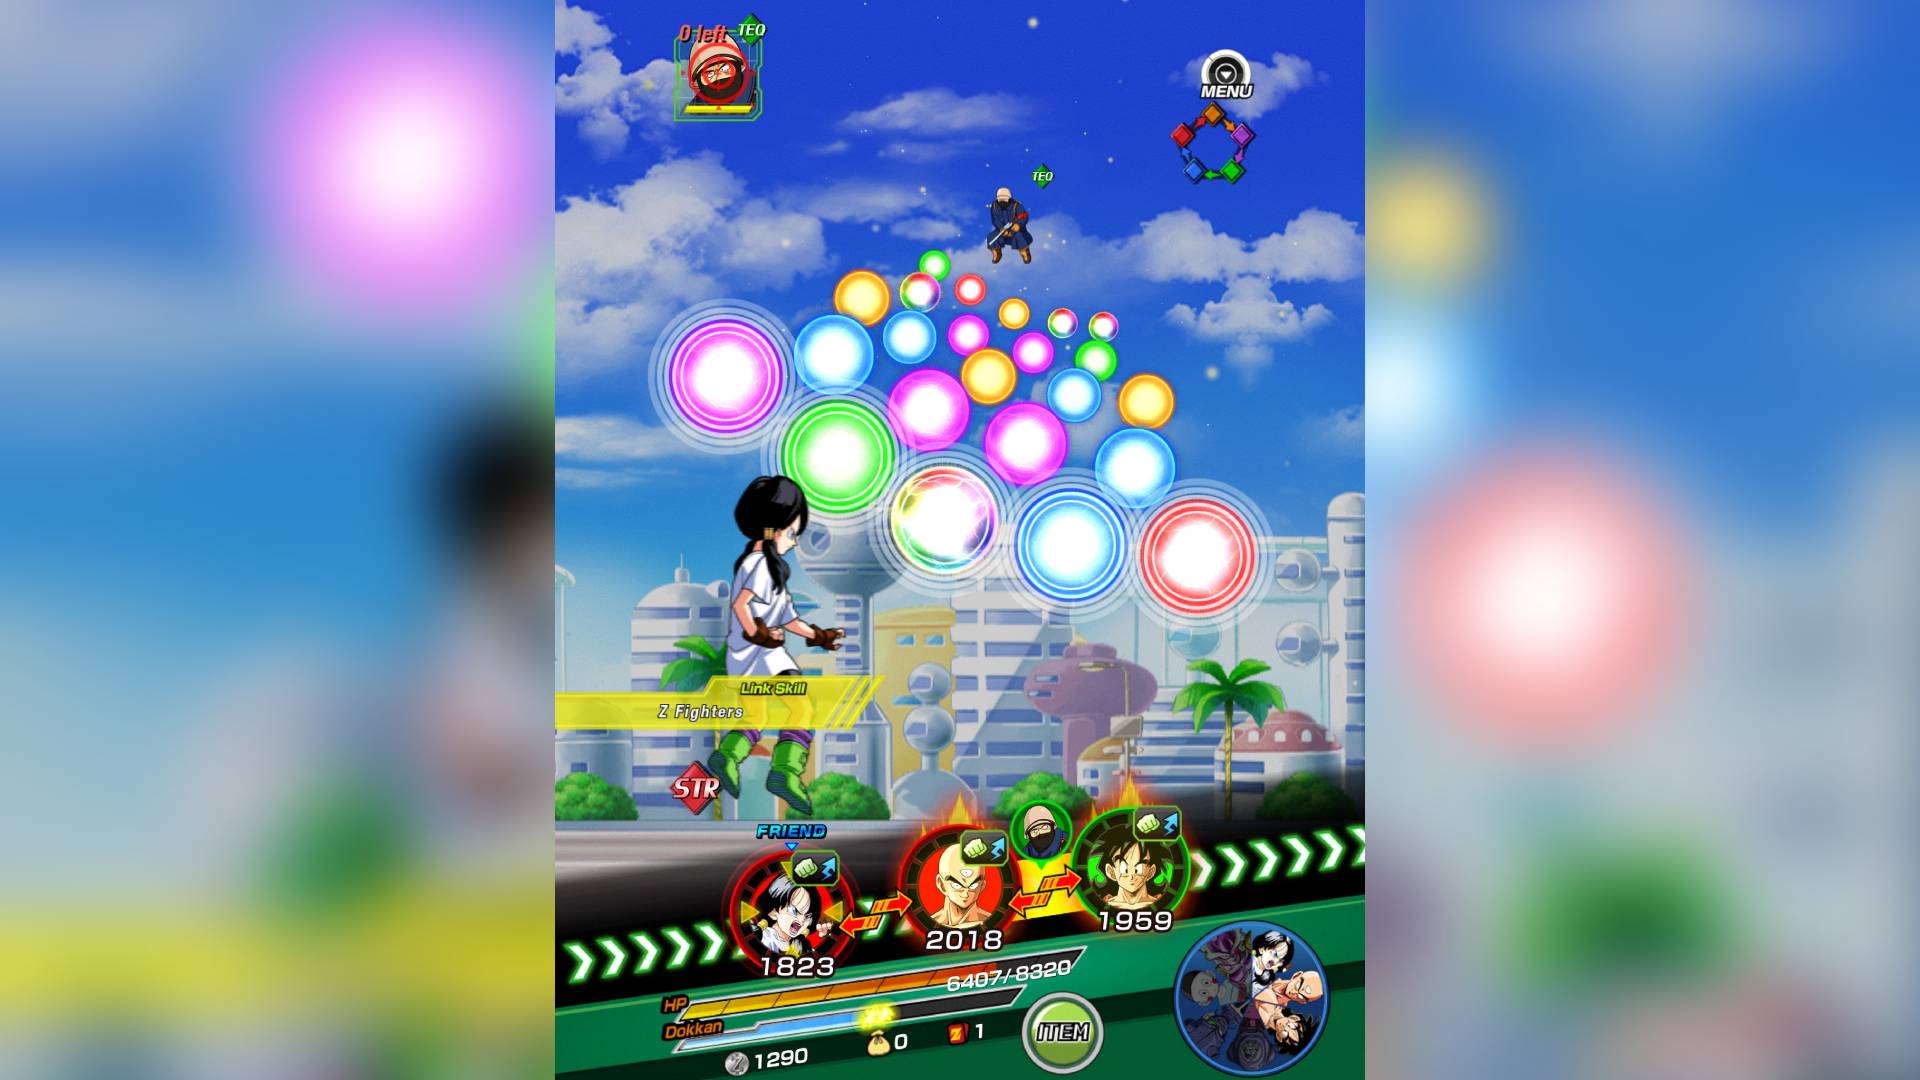 Best Dragon Ball games: a screenshot is shown from dragon Ball Dokkan Battle with Videl shown attacking floating orbs